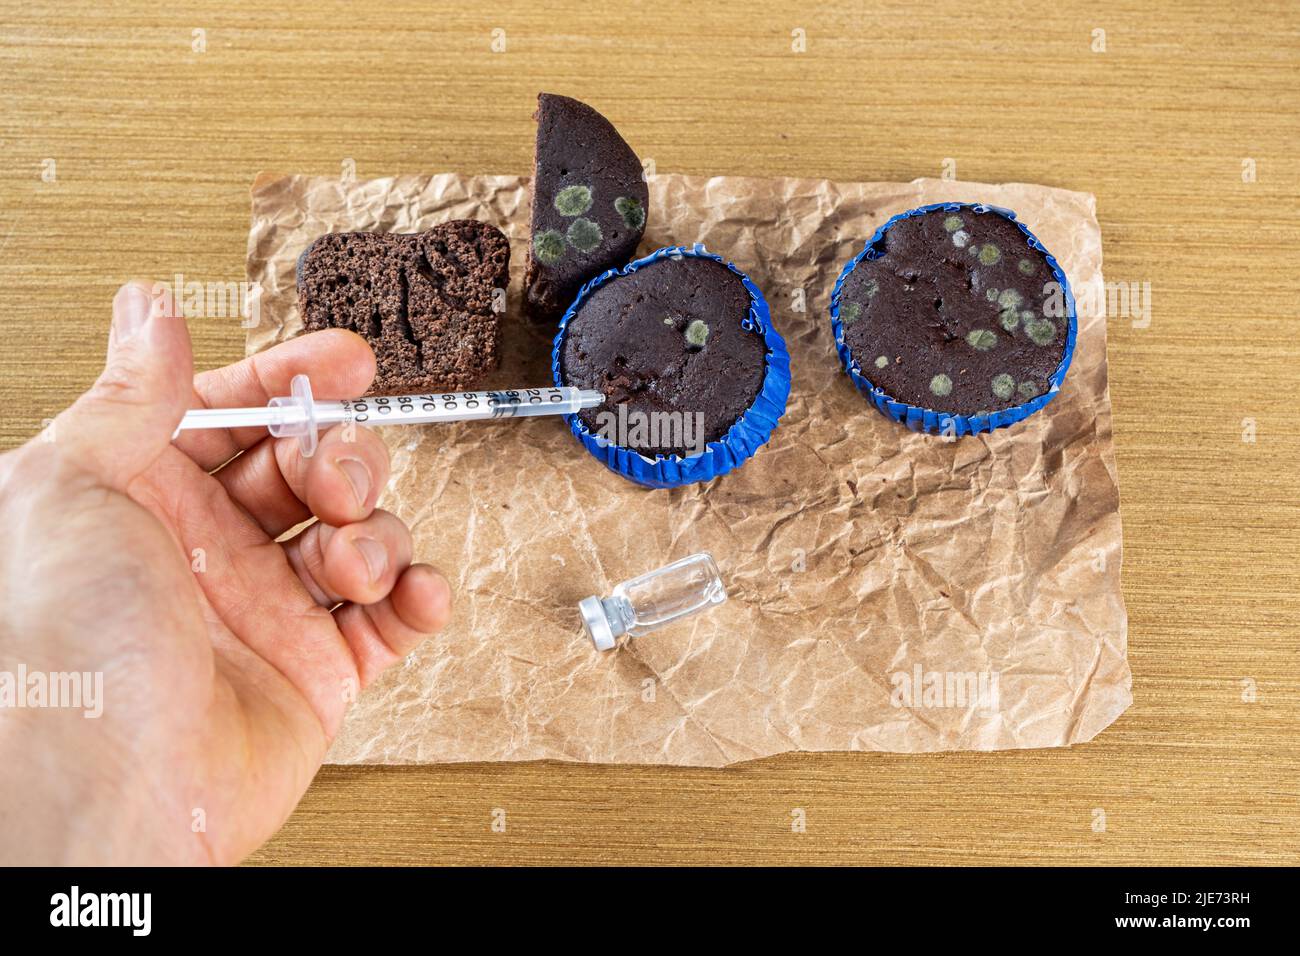 Man with syringe injecting insulin into moldy chocolate muffin top view. Stock Photo